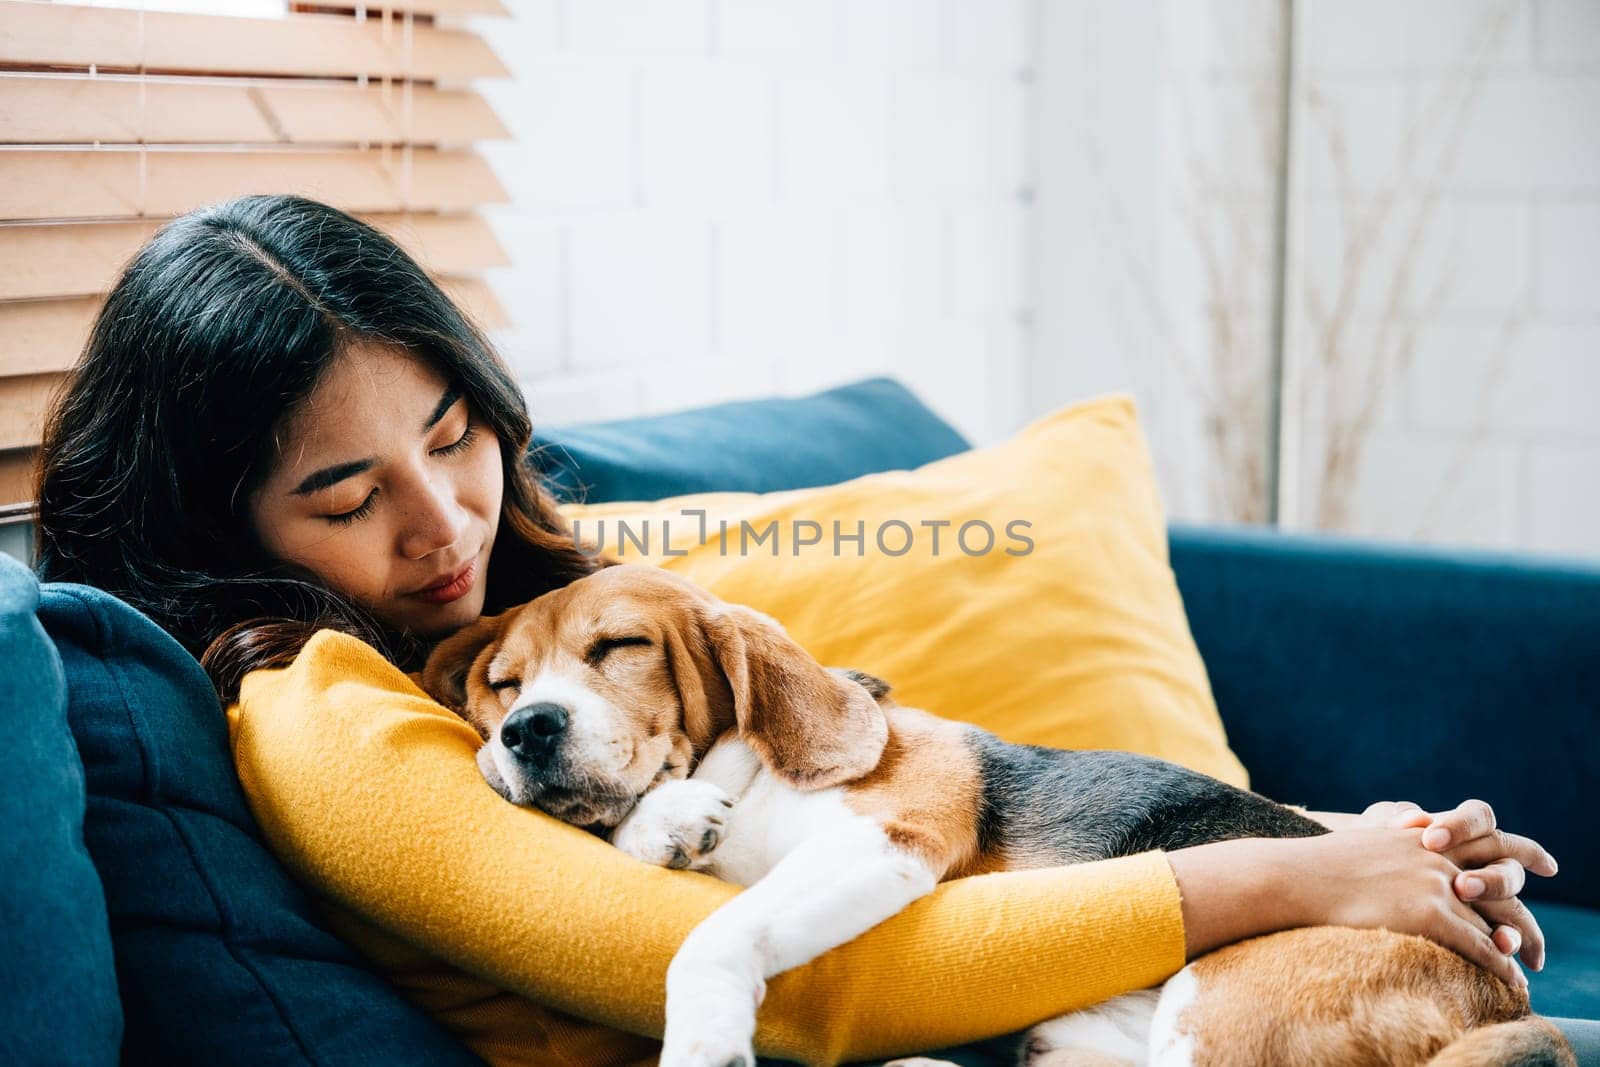 In the comfort of her home, a young Asian woman enjoys a peaceful nap on the sofa, sharing precious moments of trust, togetherness, and happiness with her beloved Beagle dog. Pet love by Sorapop